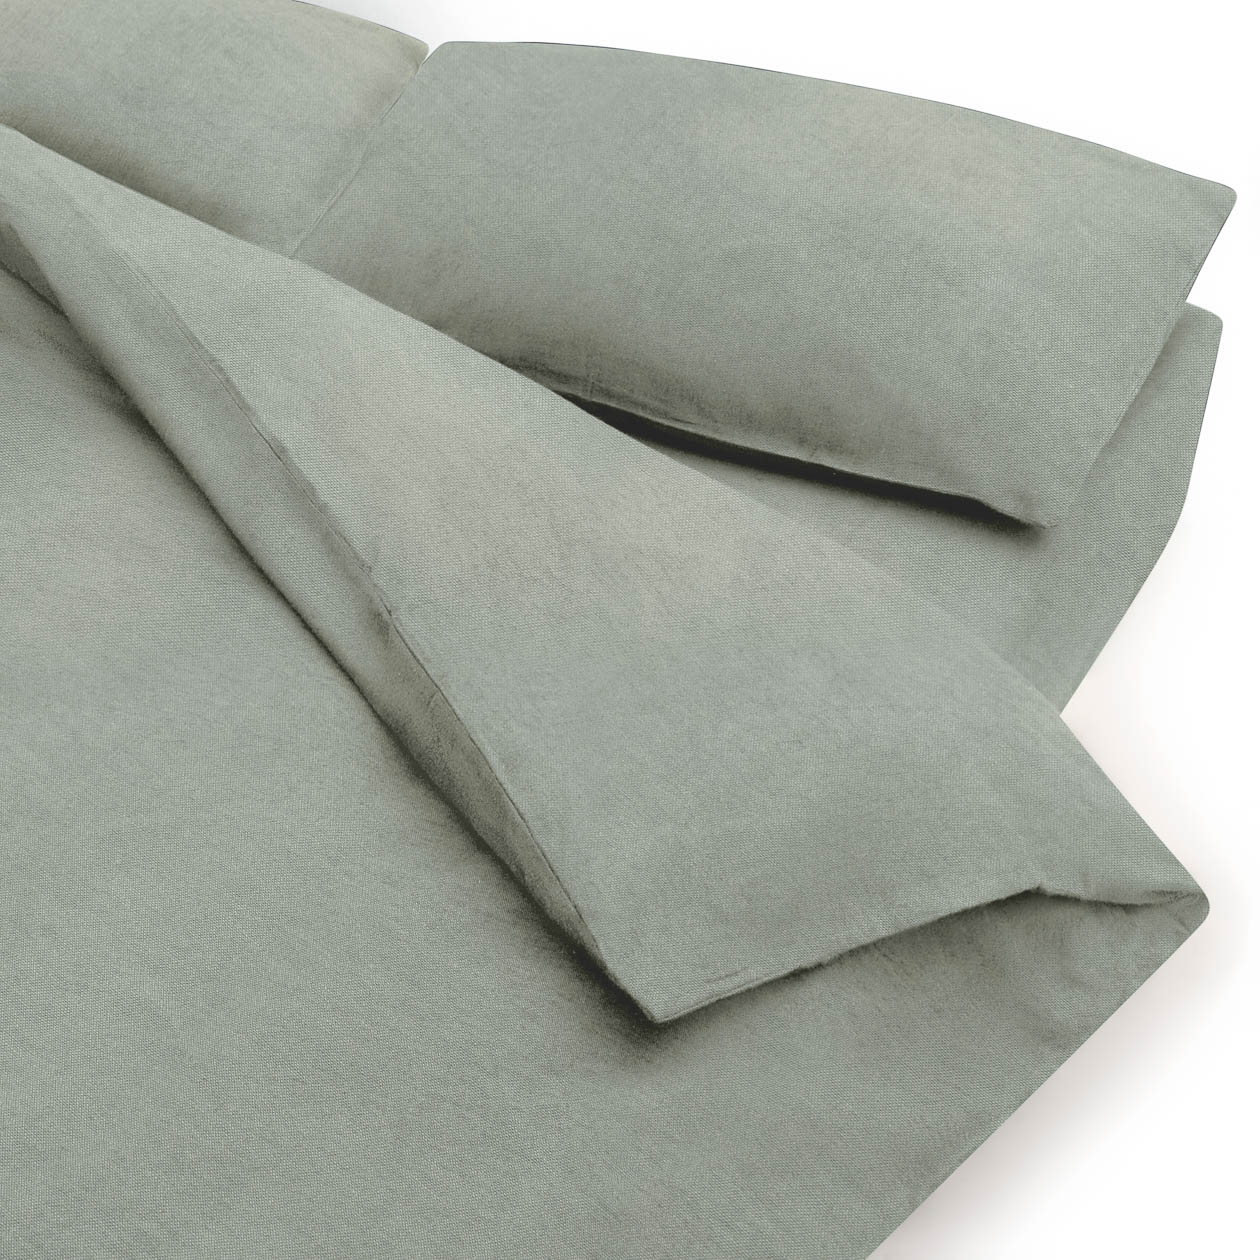 Washed Cotton Duvet Cover- Queen